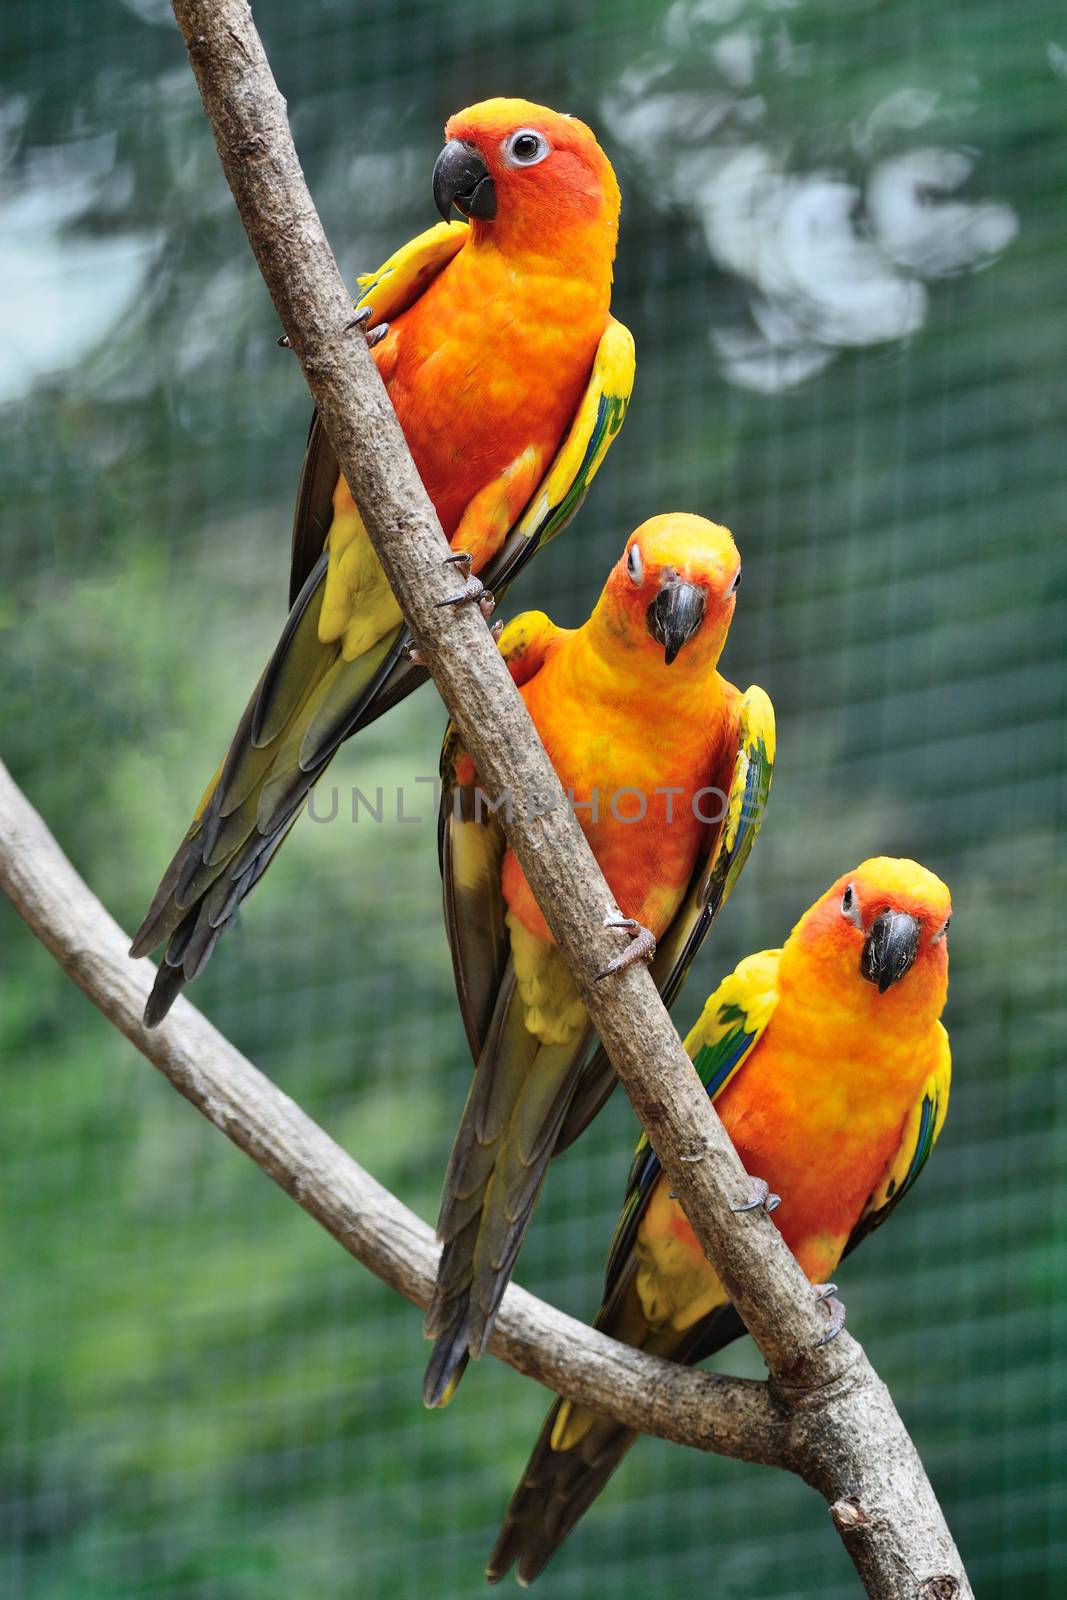 Colorful parrot bird, Sun Conure (Aratinga solstitialis), standing on a branch